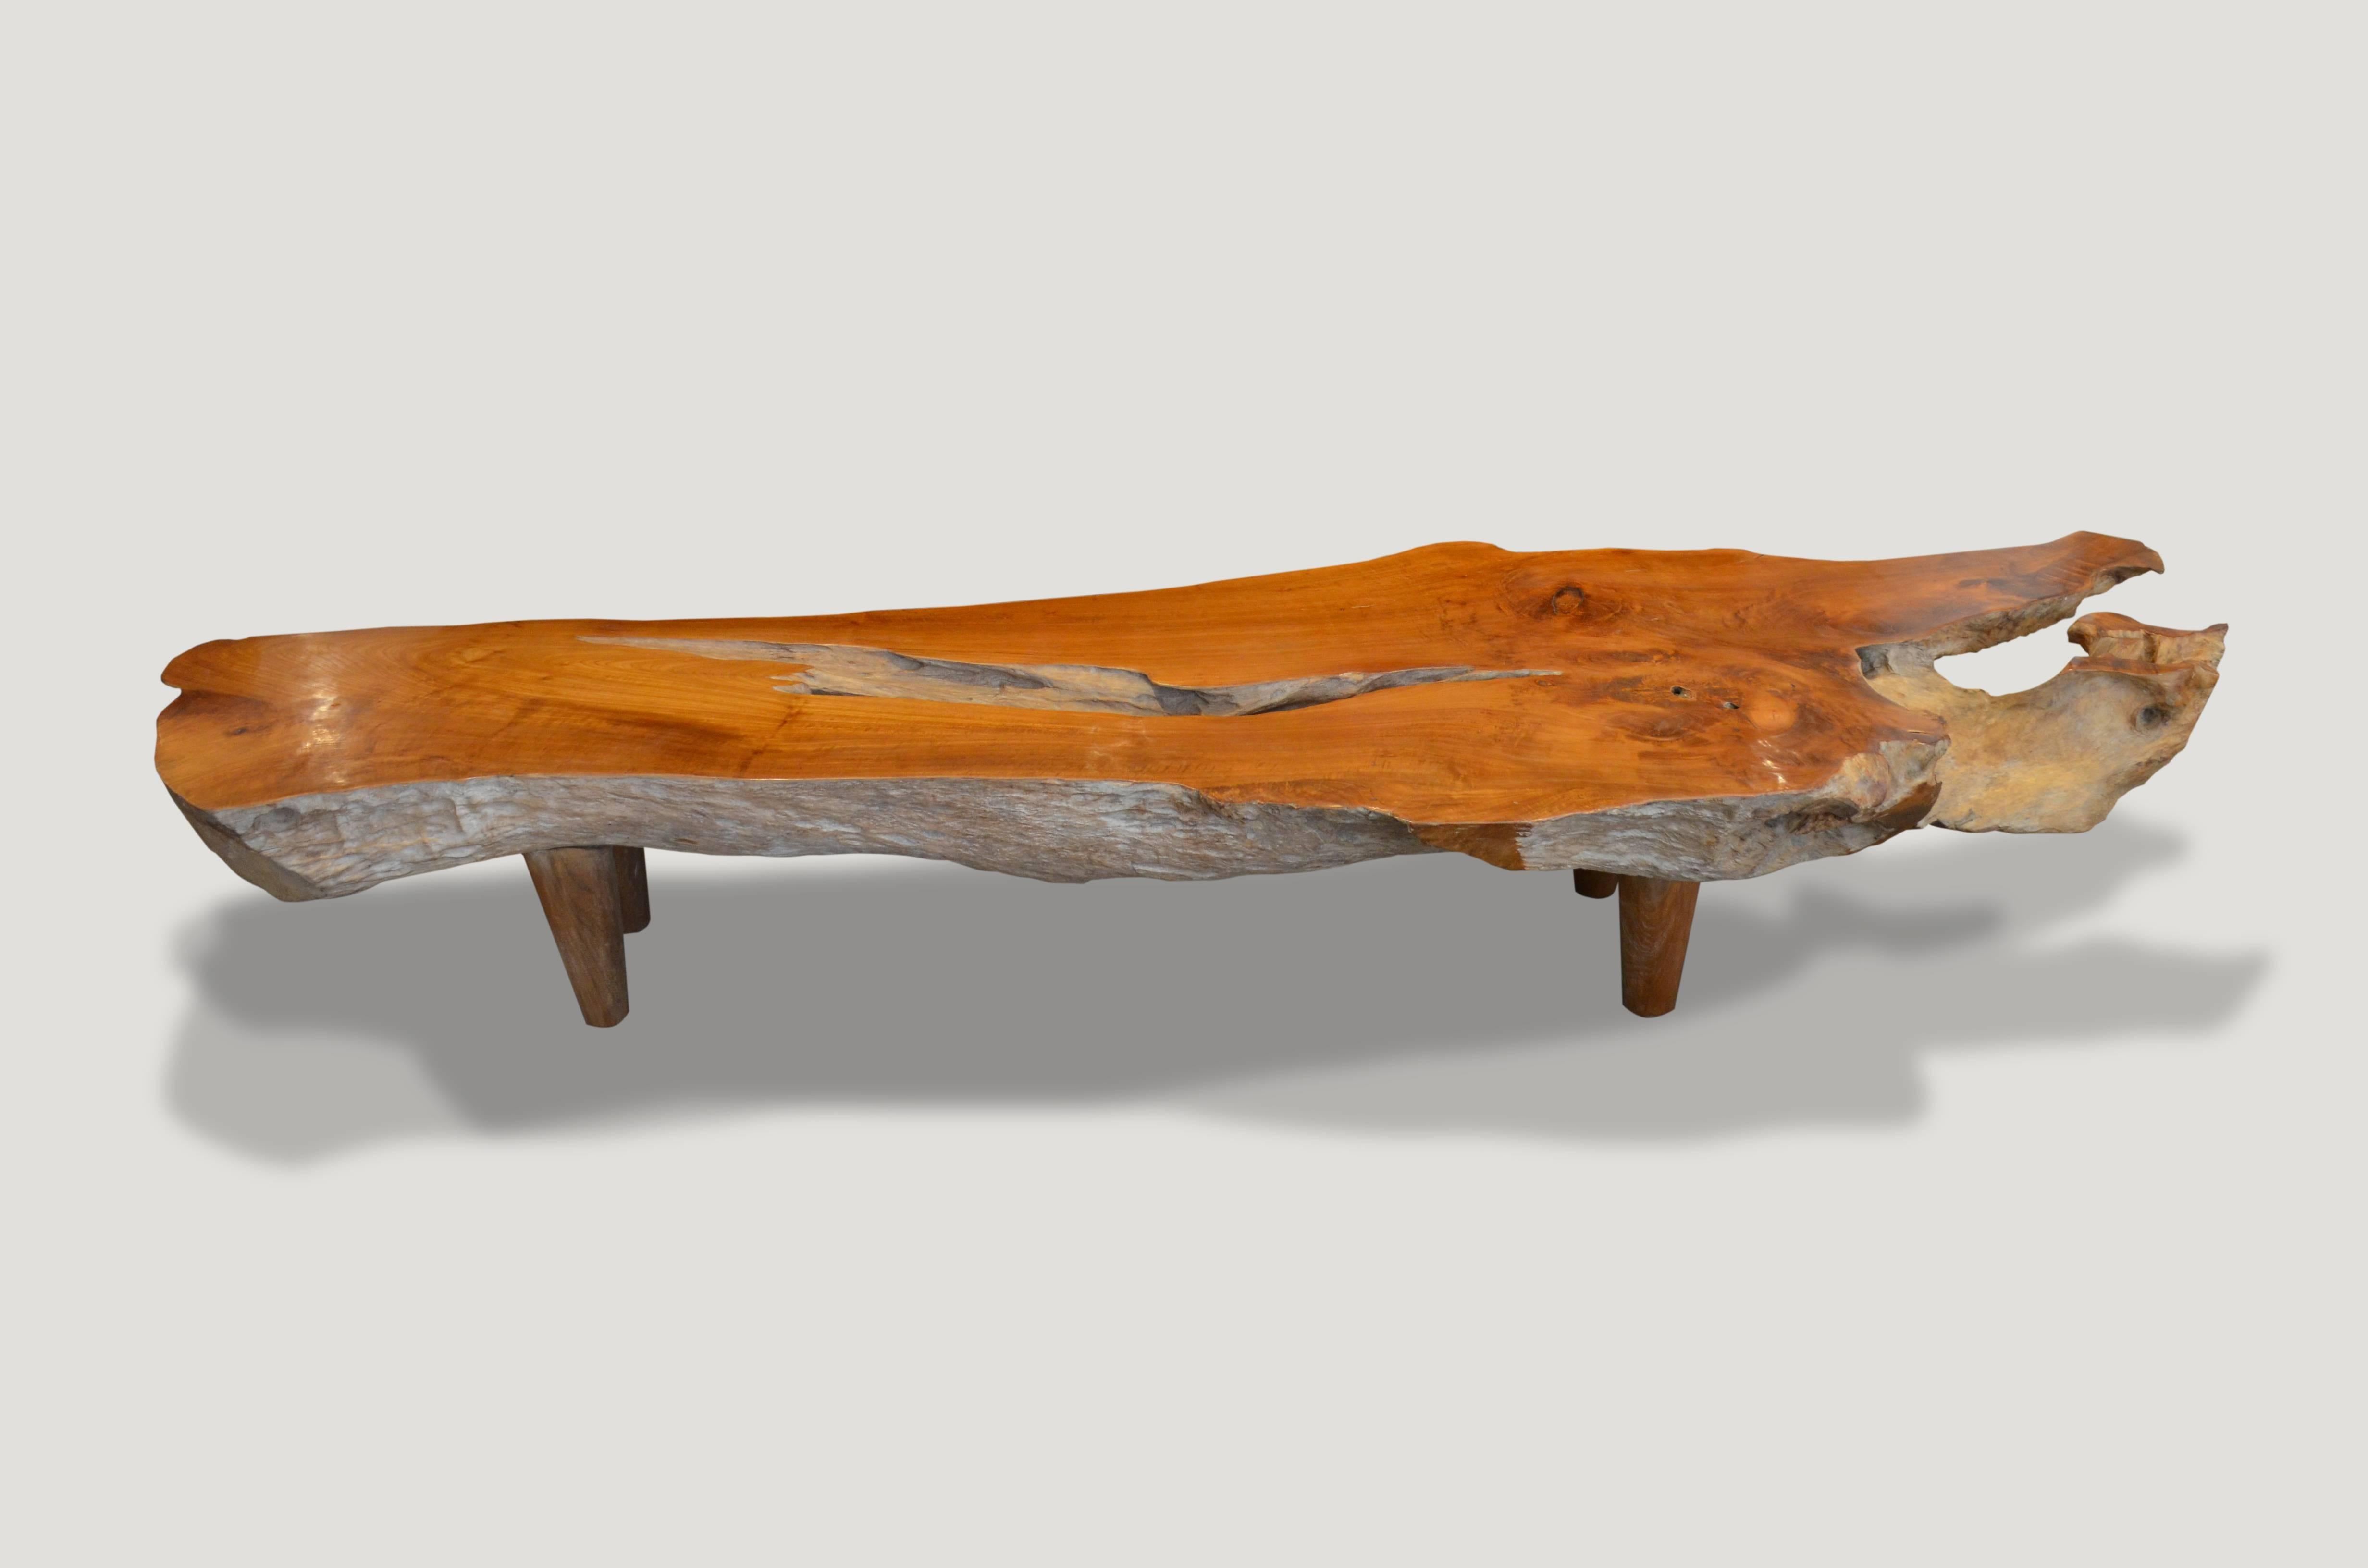 Impressive 8” single teak wood slab top coffee table or bench. We have added mid century style legs to this stunning organic shape and polished the top to enhance the grain in the reclaimed teak wood, whilst leaving sections of the sides raw for an